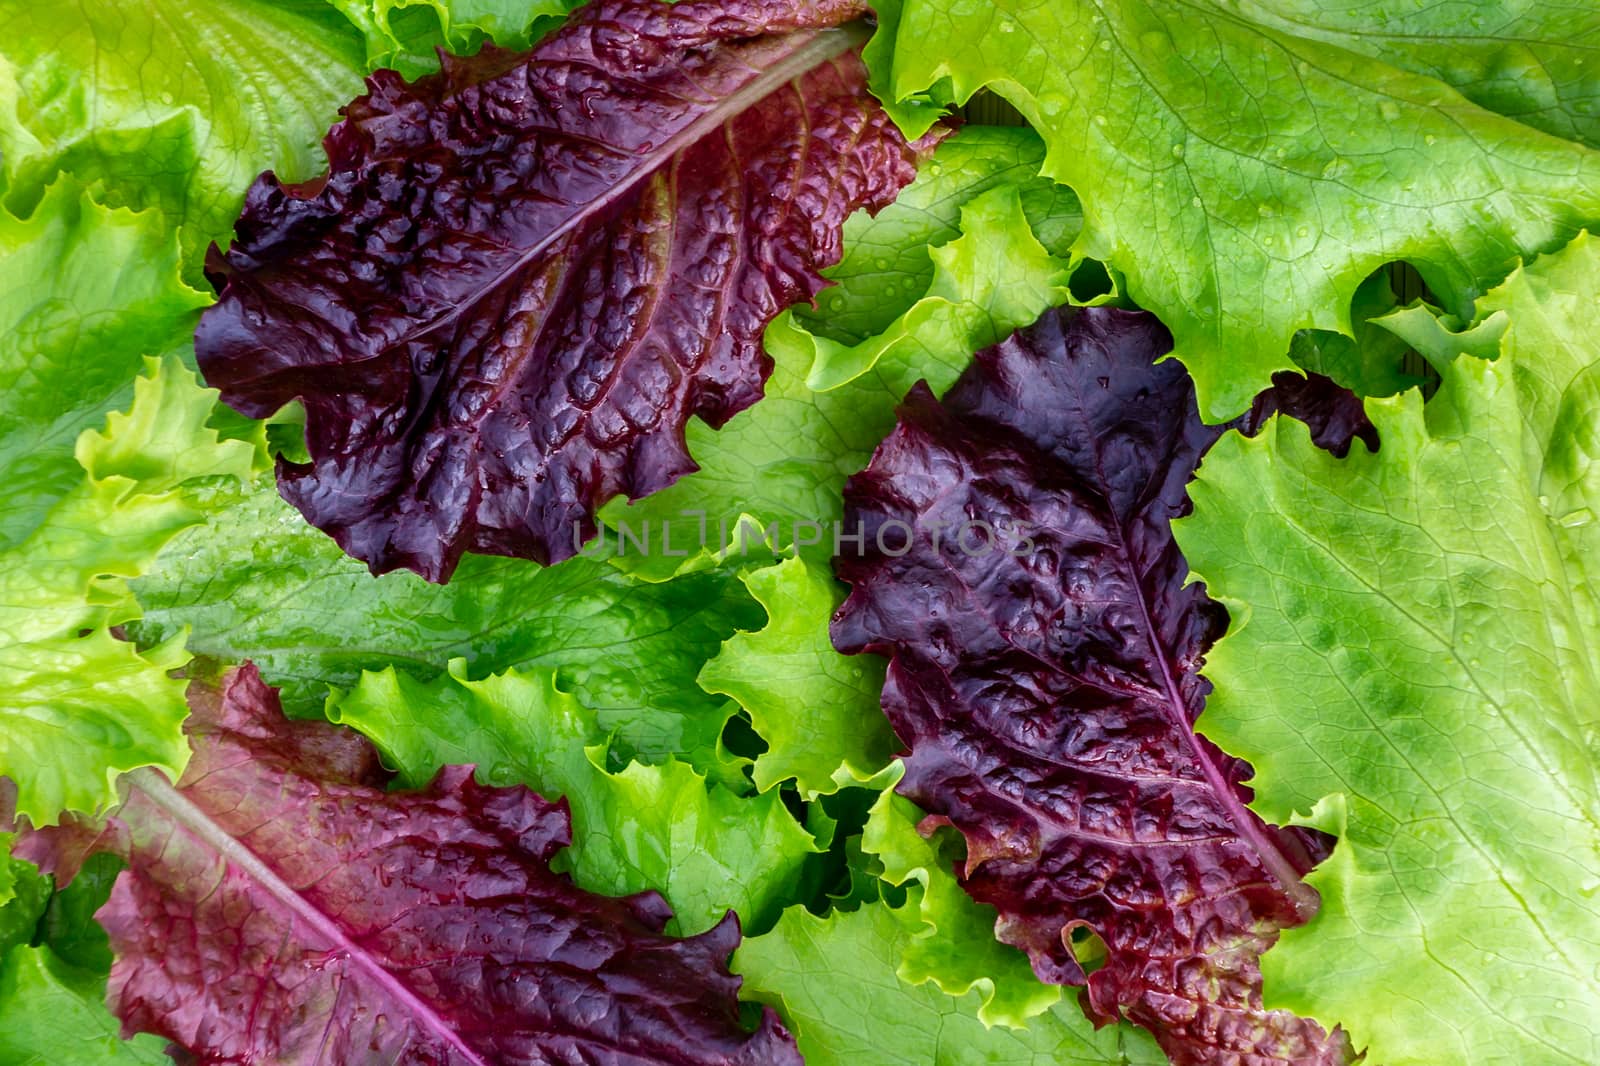 Fresh cut leaves of green and pupprple lettuce texture, top view.